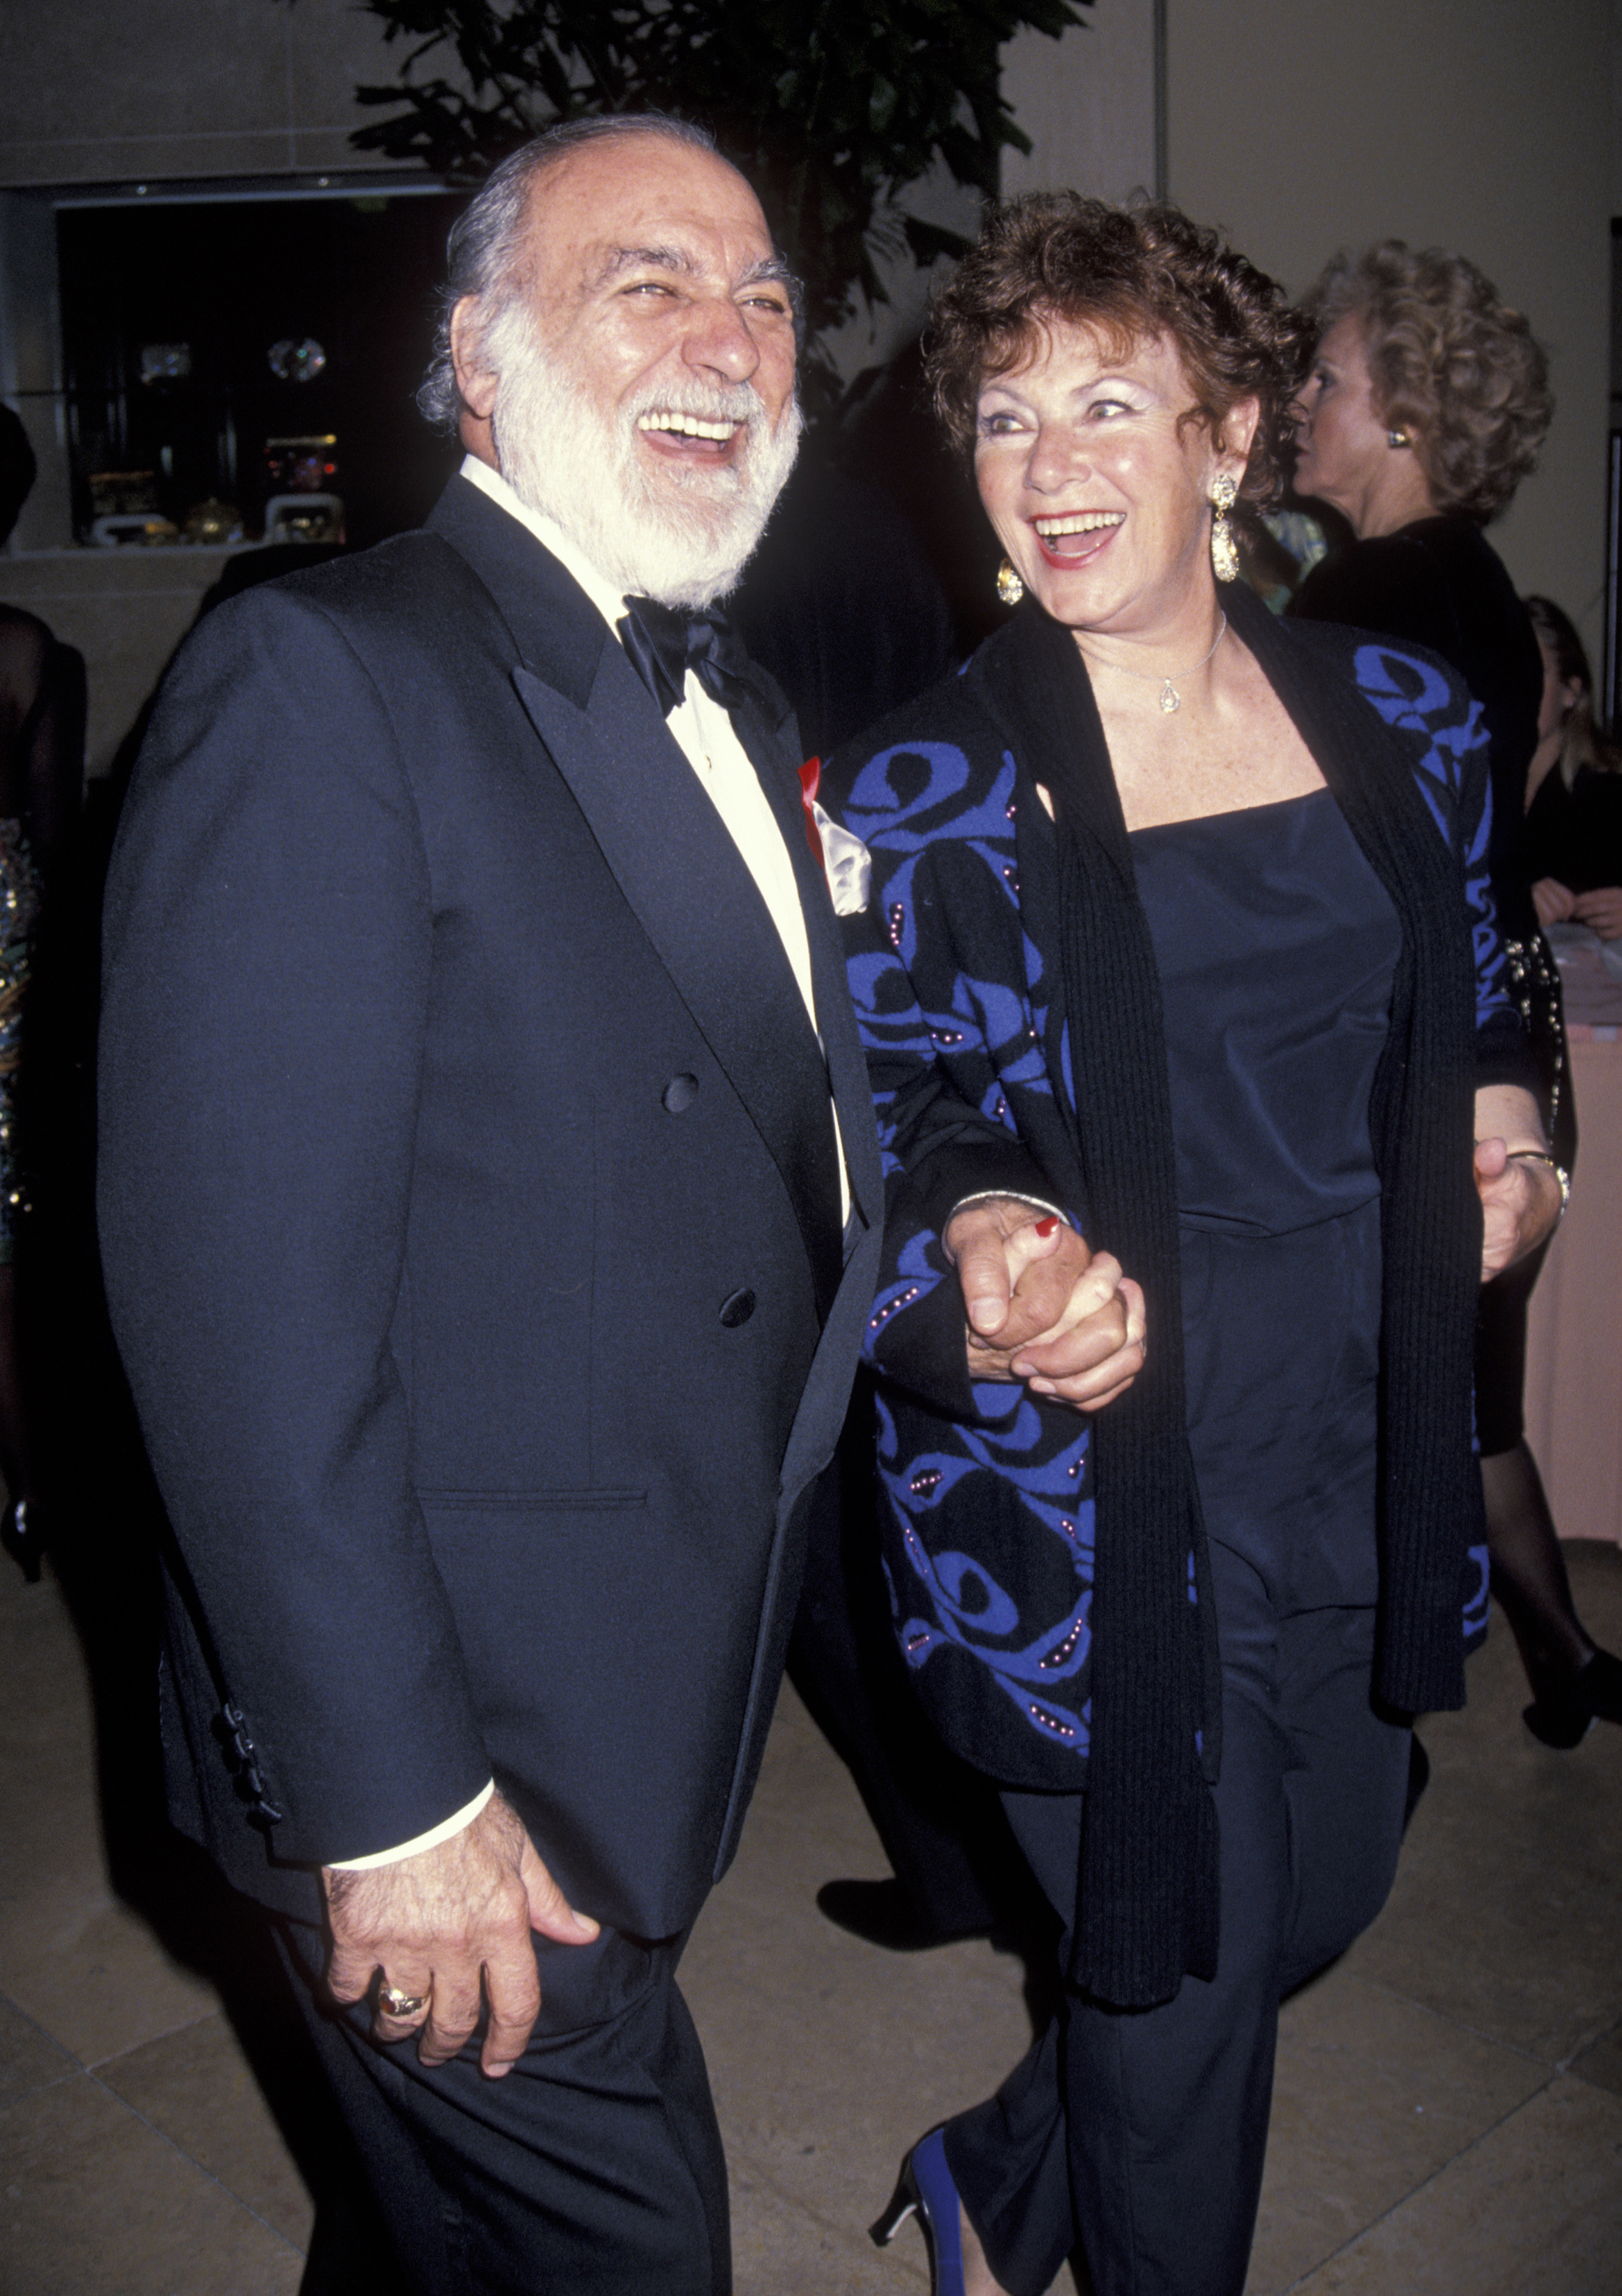 Marion Ross and Paul Michael attending Seventh Annual American Society of Cinematographers Awards on February 21, 1993 at the Beverly Hilton Hotel in Beverly Hills, California | Source: Getty Images